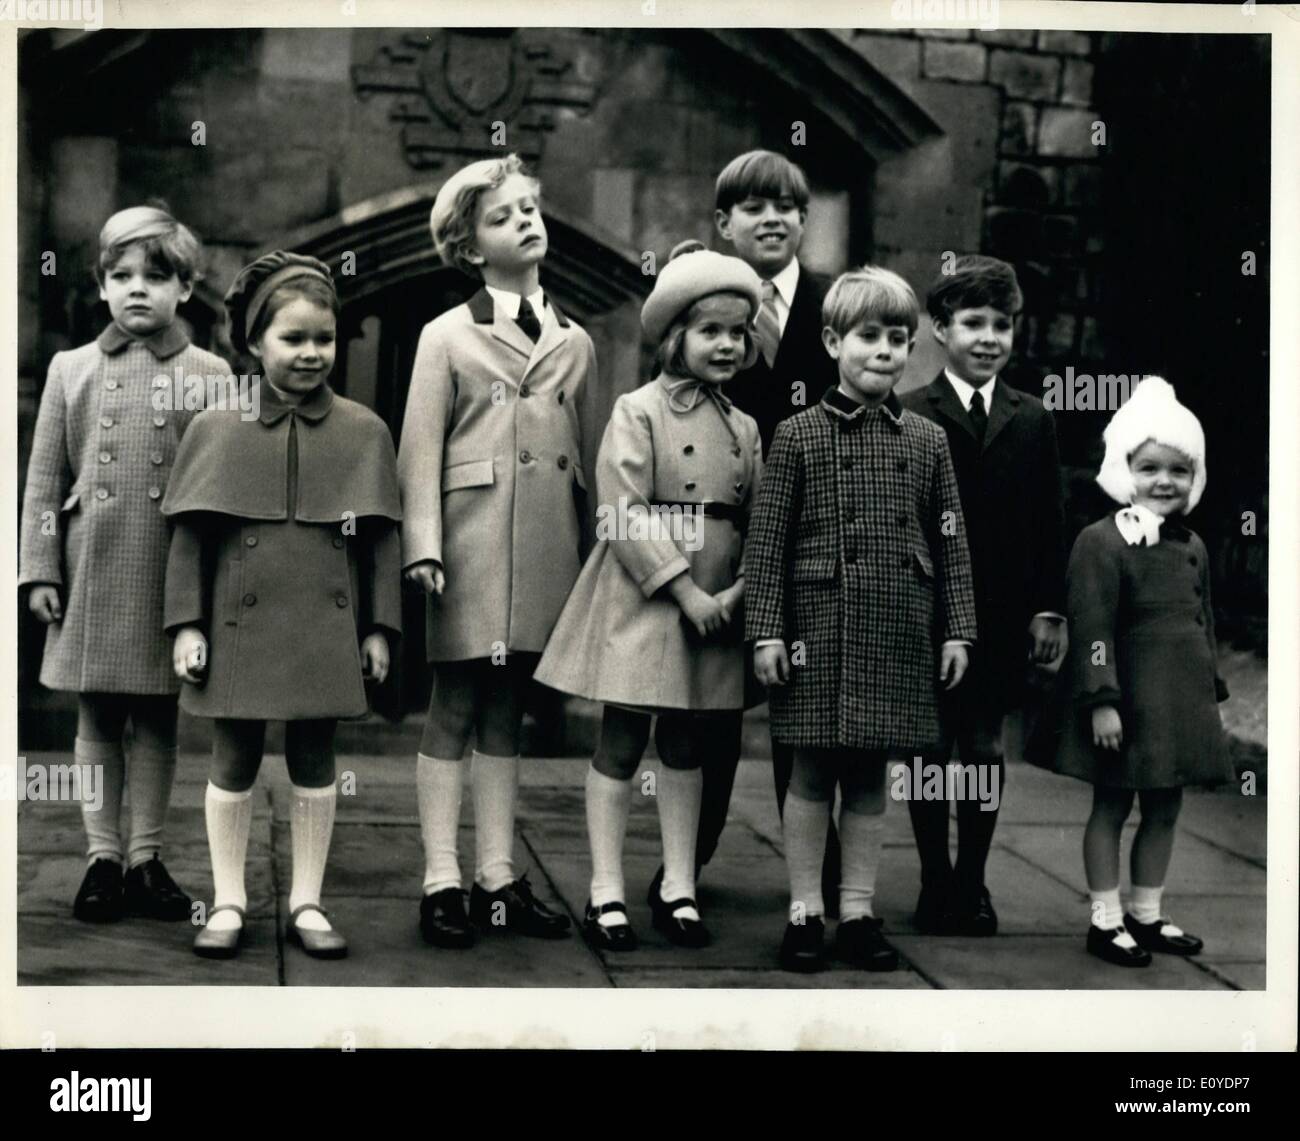 Dec. 12, 1969 - Children Of Royalty: Children Of Britain's Royal Family Pose For A ''Family Group'' At Windsor Castle On Christmas Morning, After They Had Attended Divine Service At St. George's Chapel. From Left To Right: James Ogilvy, Five-Year-Old Son Of Princess Alexandra And The Honourable Angus Ogilvy: Lady Sarah Armstrong-Jones, Five-Year-Old Daughter Of Princess Margaret And The Earl Of Snowdon: The Earl Of St Stock Photo